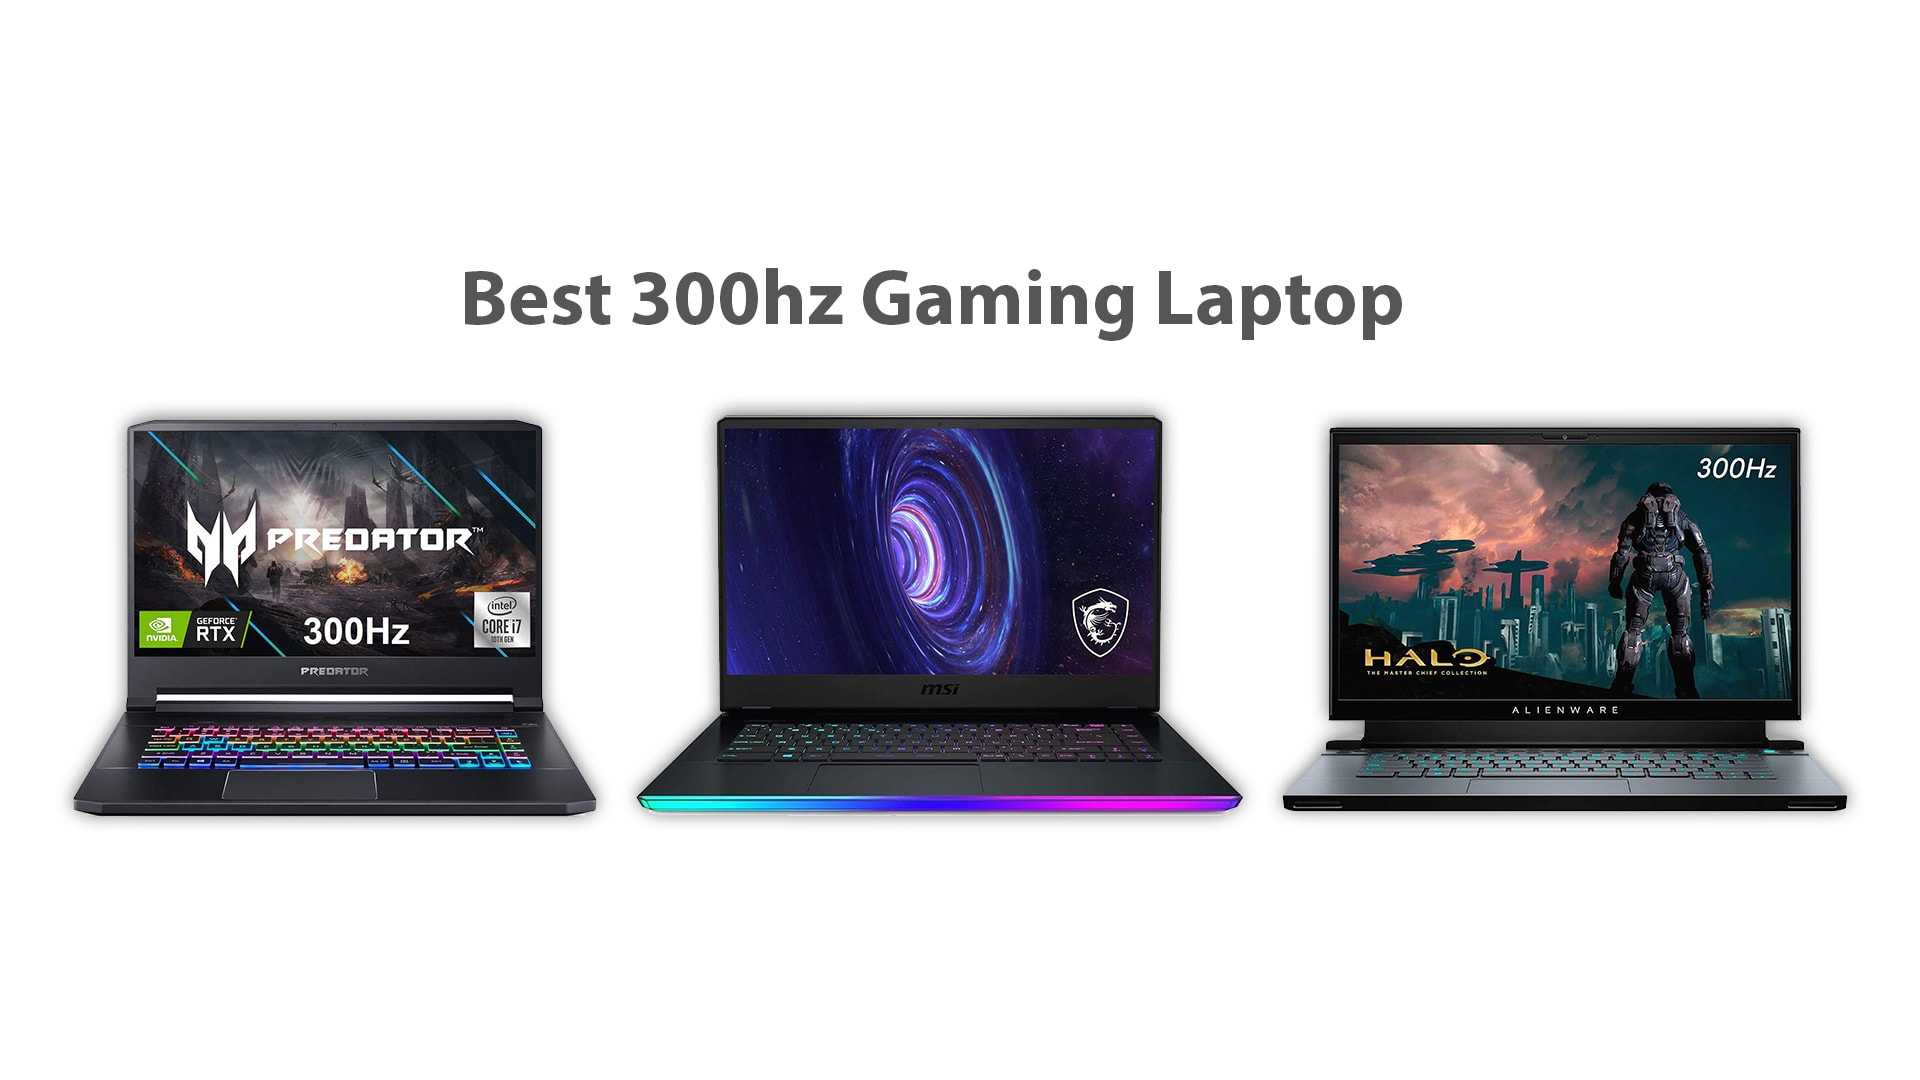 How to Choose The Best 300Hz Gaming Laptop